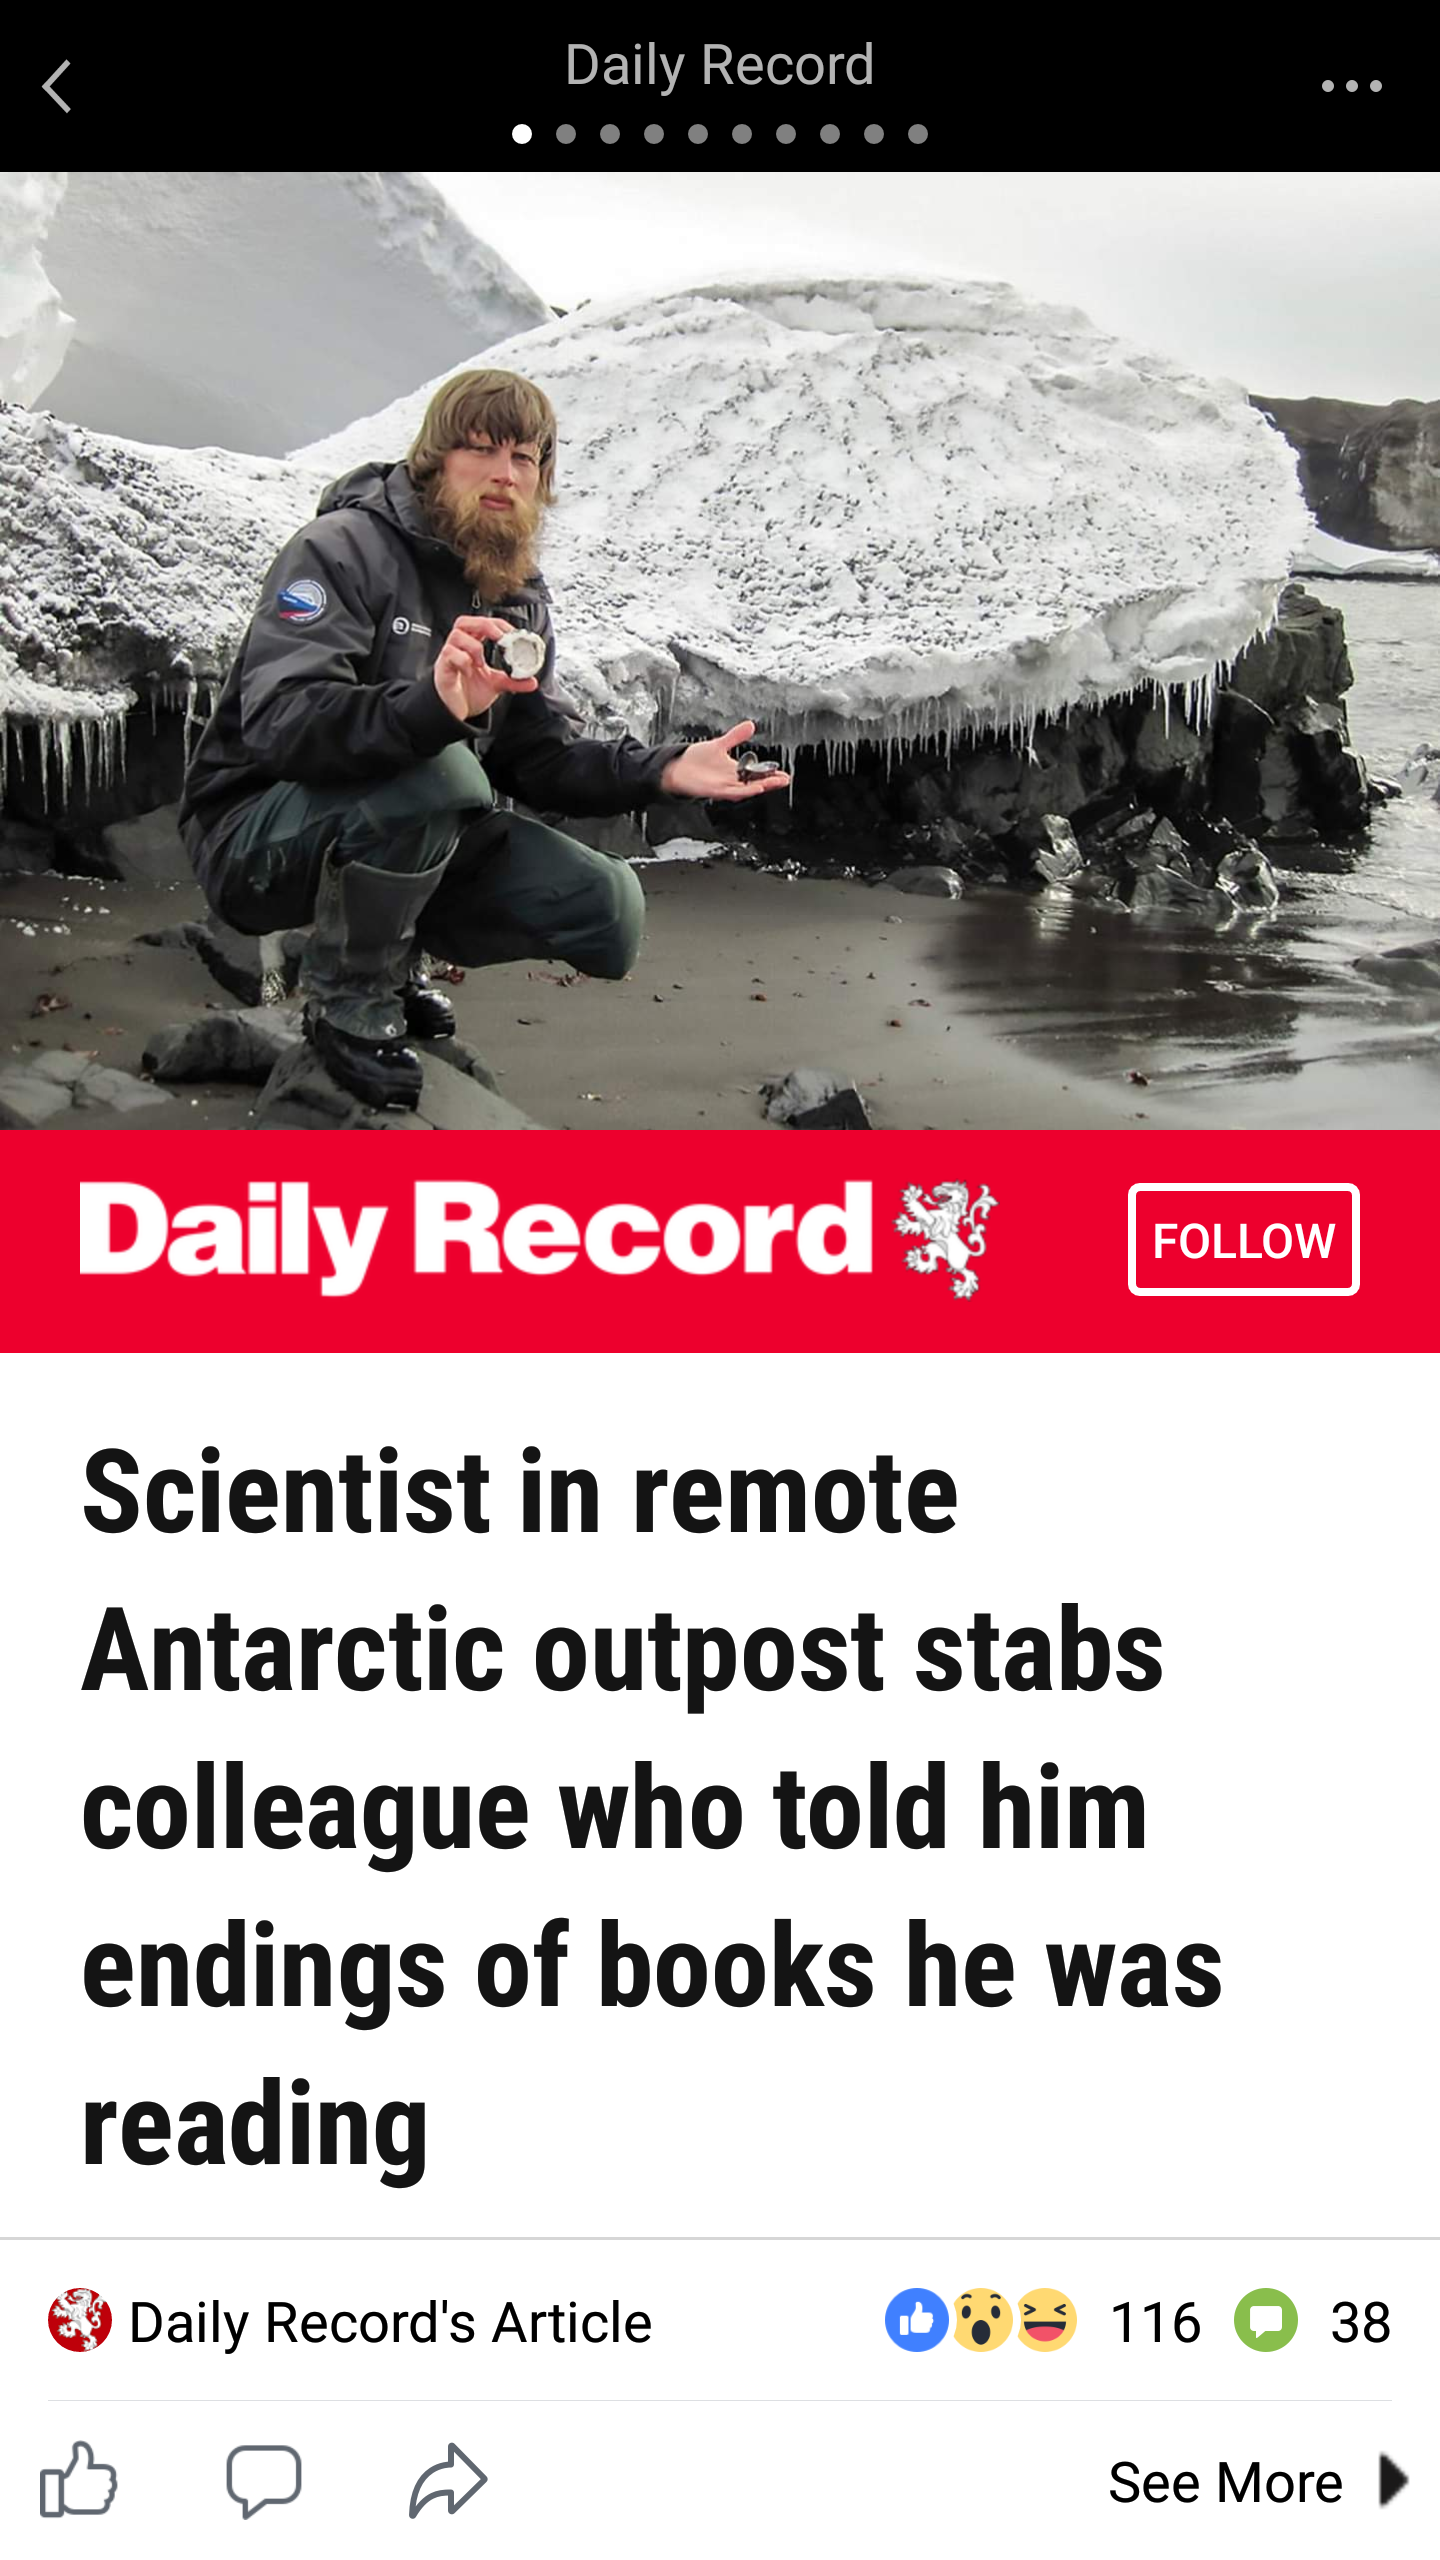 random cool pic Daily Record Daily Record Scientist in remote Antarctic outpost stabs colleague who told him endings of books he was reading Daily Record's Article Ove 116 38 See More